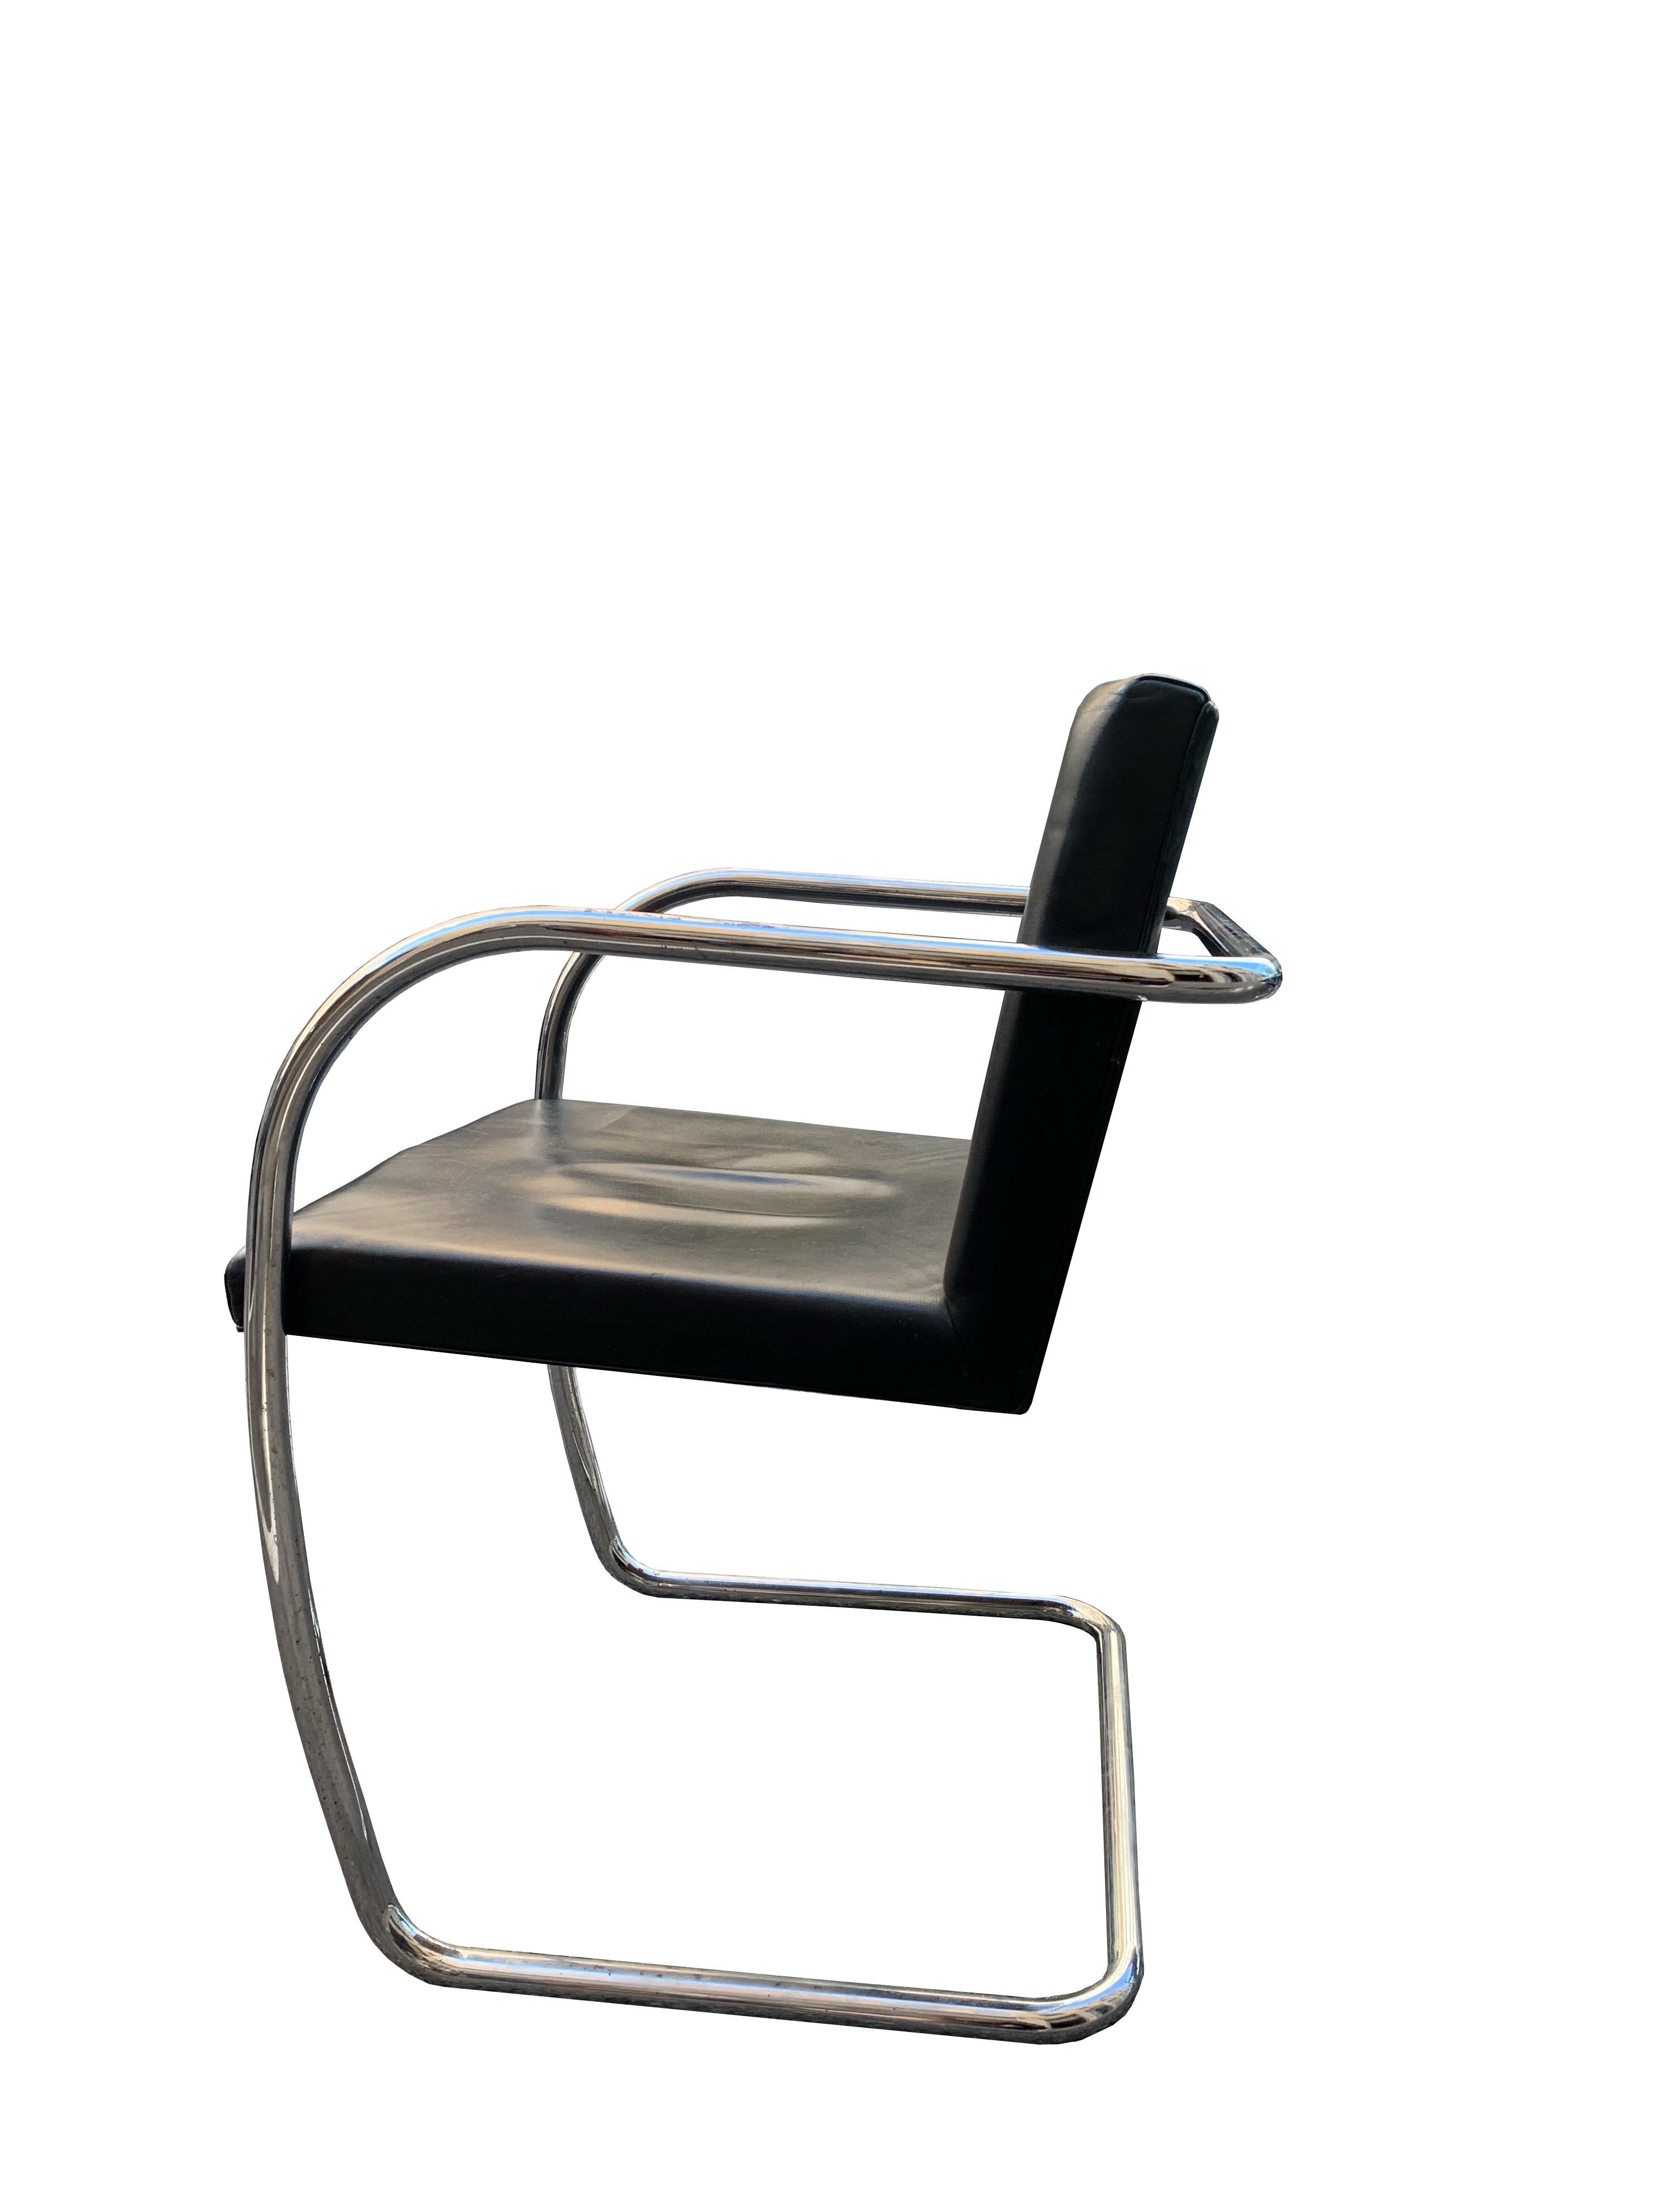 Set of six tubular Brno chairs by Mies Van Der Rohe, published by Knoll circa 1970.
Materials: Skai and Chrome 
The chrome is in perfect condition, the seat can be rewoven on request. 

Measures: height of the seats: 44 cm 
width between arms: 50,5